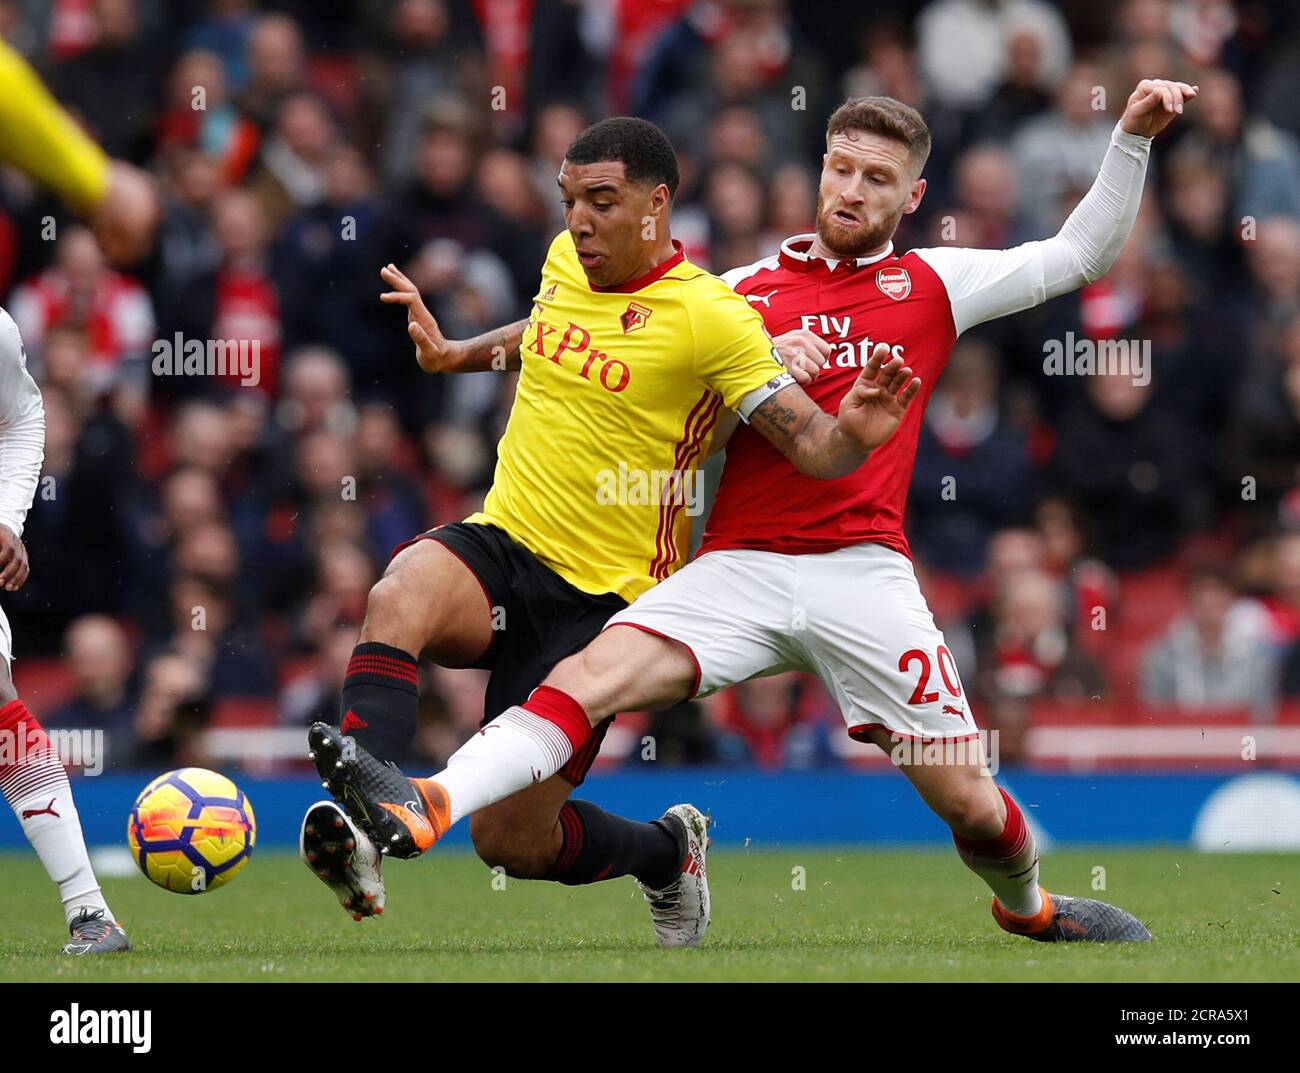 Soccer Football - Premier League - Arsenal vs Watford - Emirates Stadium, London, Britain - March 11, 2018   Watford's Troy Deeney in action with Arsenal's Shkodran Mustafi            REUTERS/Eddie Keogh    EDITORIAL USE ONLY. No use with unauthorized audio, video, data, fixture lists, club/league logos or 'live' services. Online in-match use limited to 75 images, no video emulation. No use in betting, games or single club/league/player publications.  Please contact your account representative for further details. Stock Photo